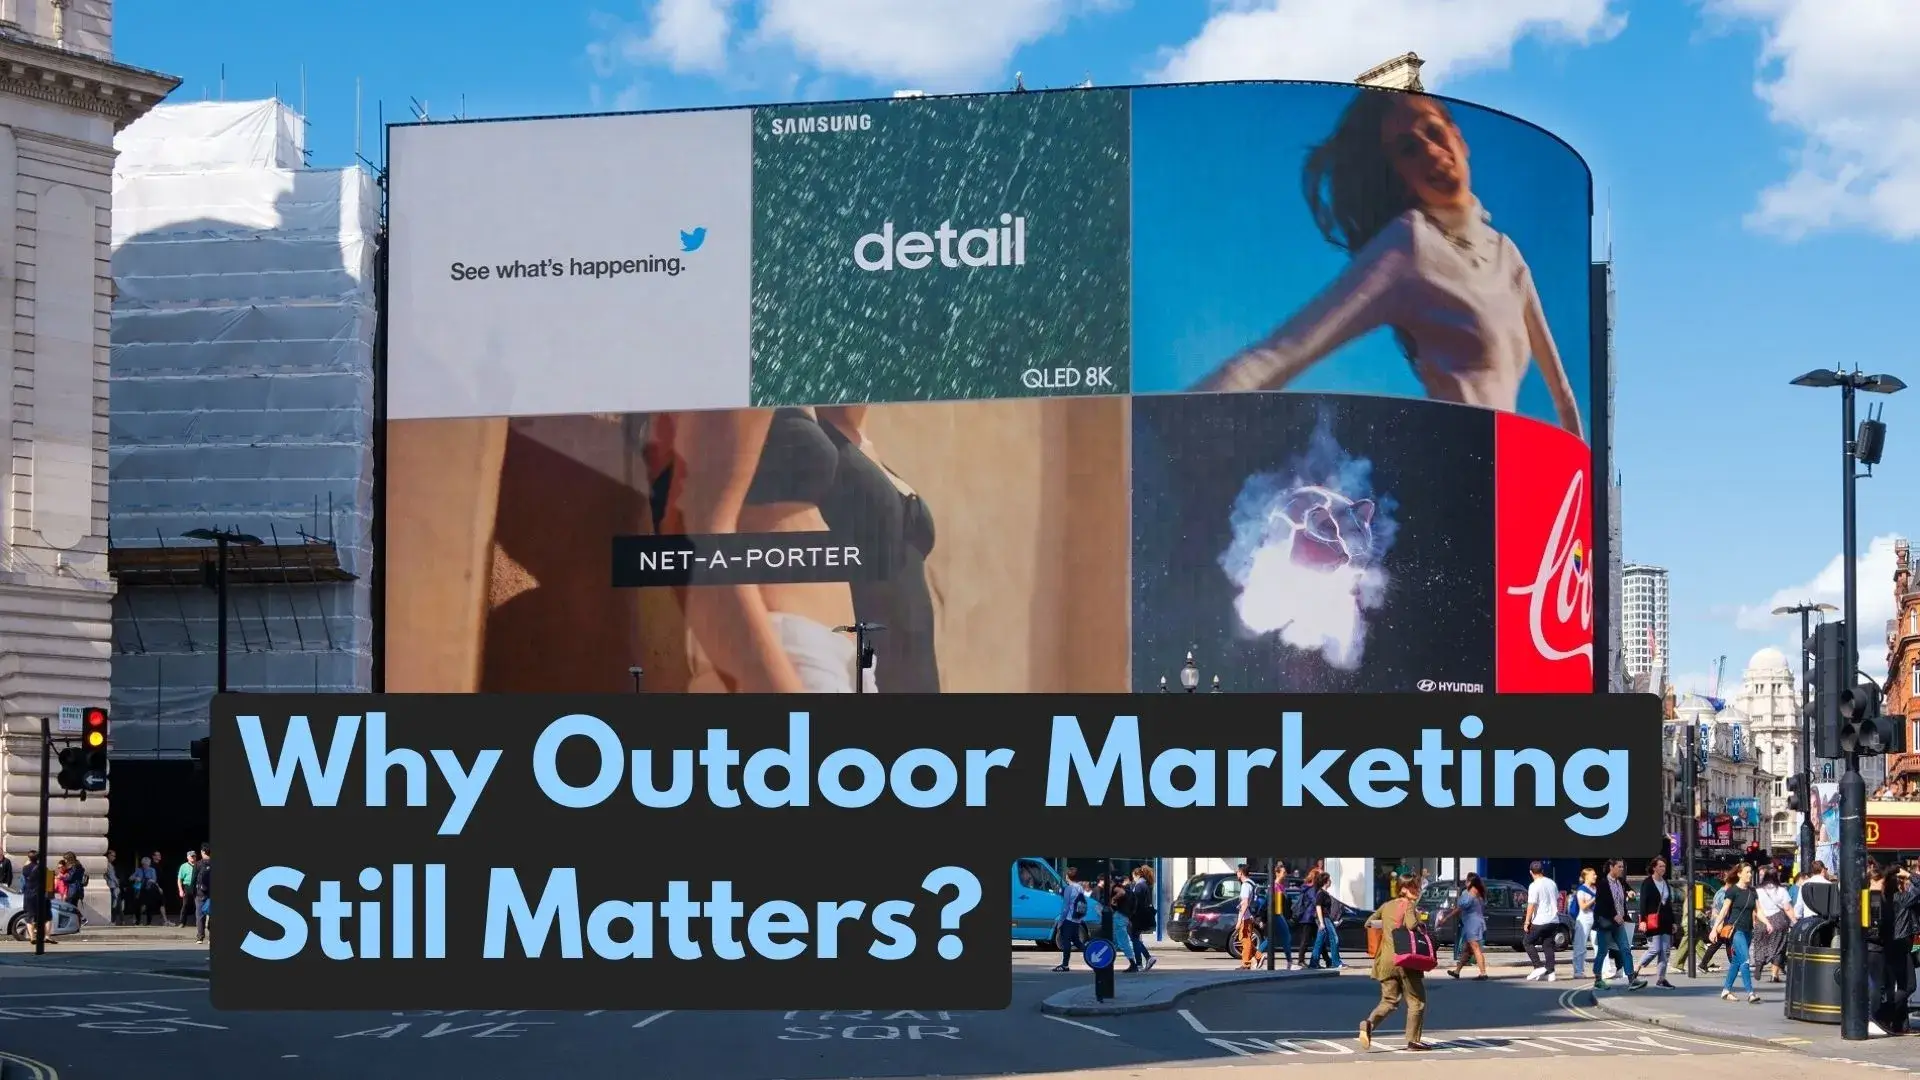 Importance of Outdoor Marketing : How Big of an Impact Flashing Banners Have On People